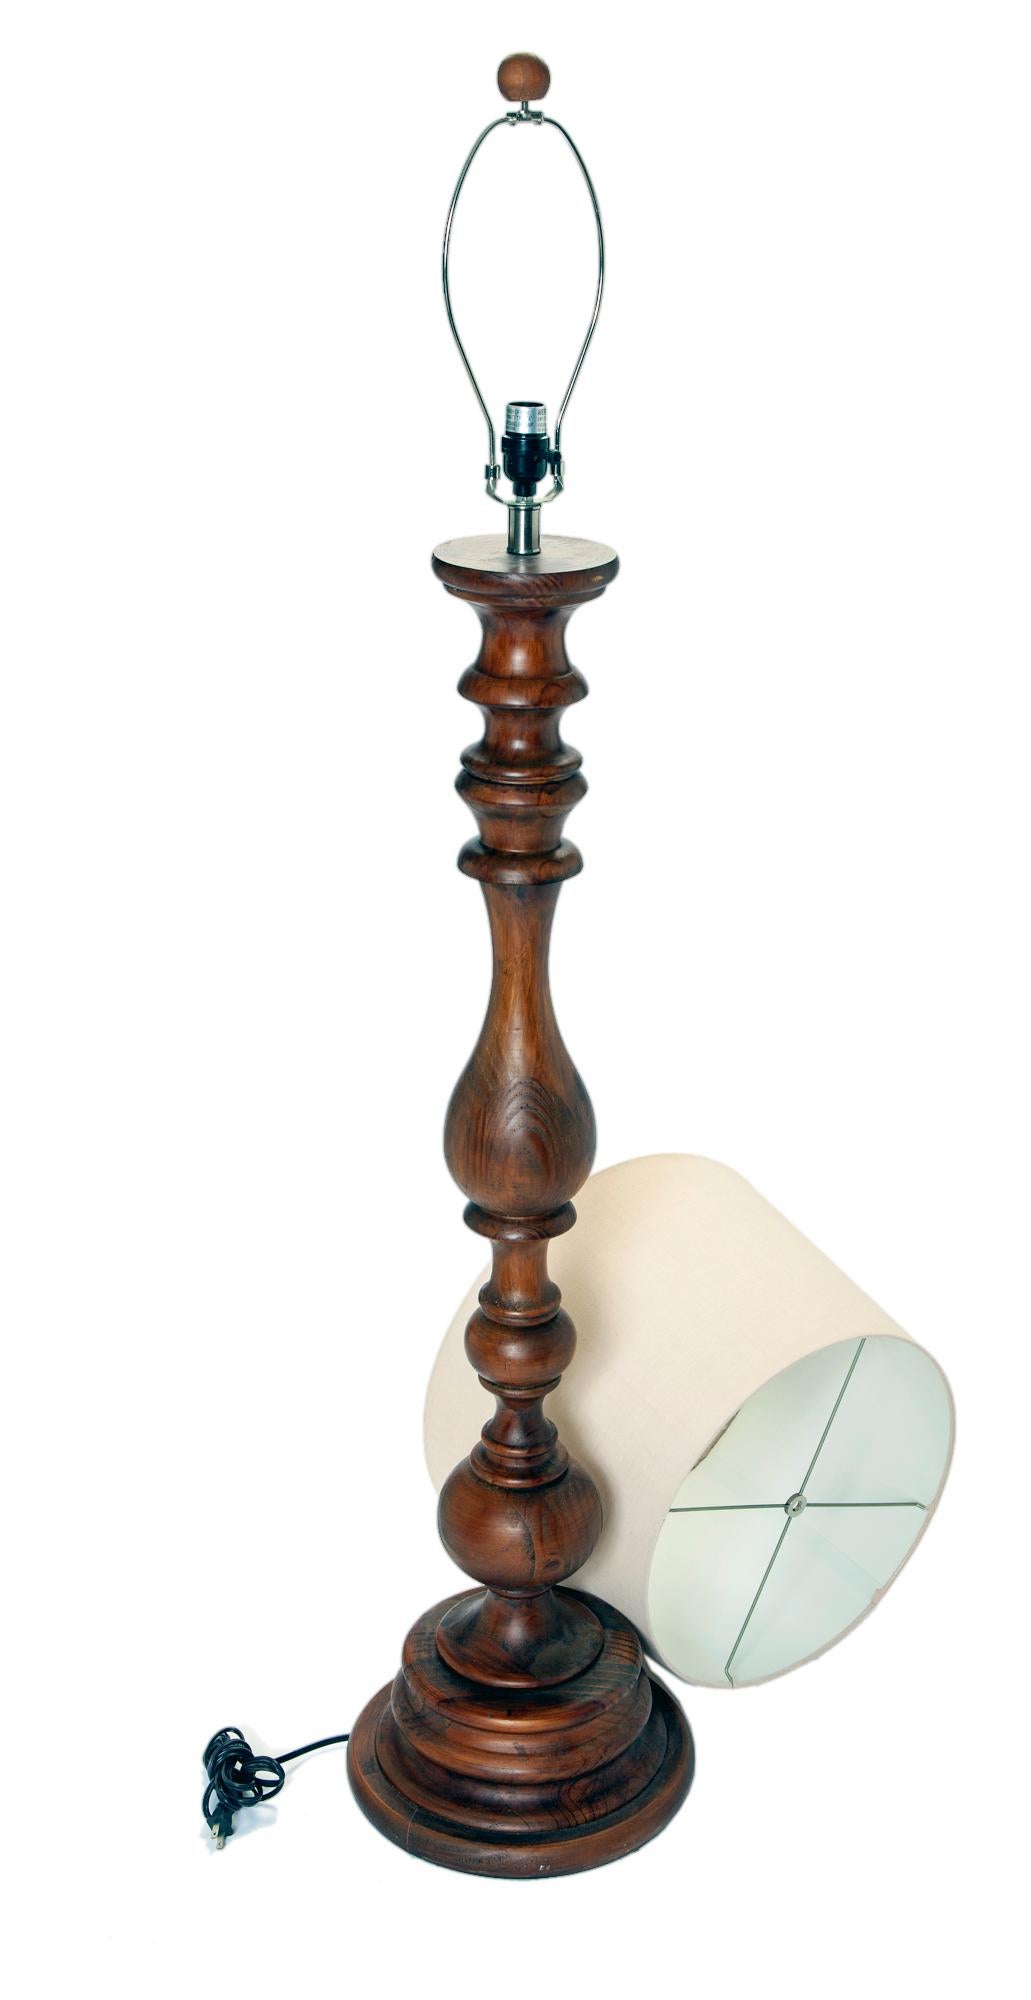 Turned hardwood floor lamp with linen barrel shade & wood finial. This traditional lamp is perfect for the study, any casual or coastal space.
A chic turned wood decorative floor lamp with original shade & finial 
The base of the floor lamp is 15